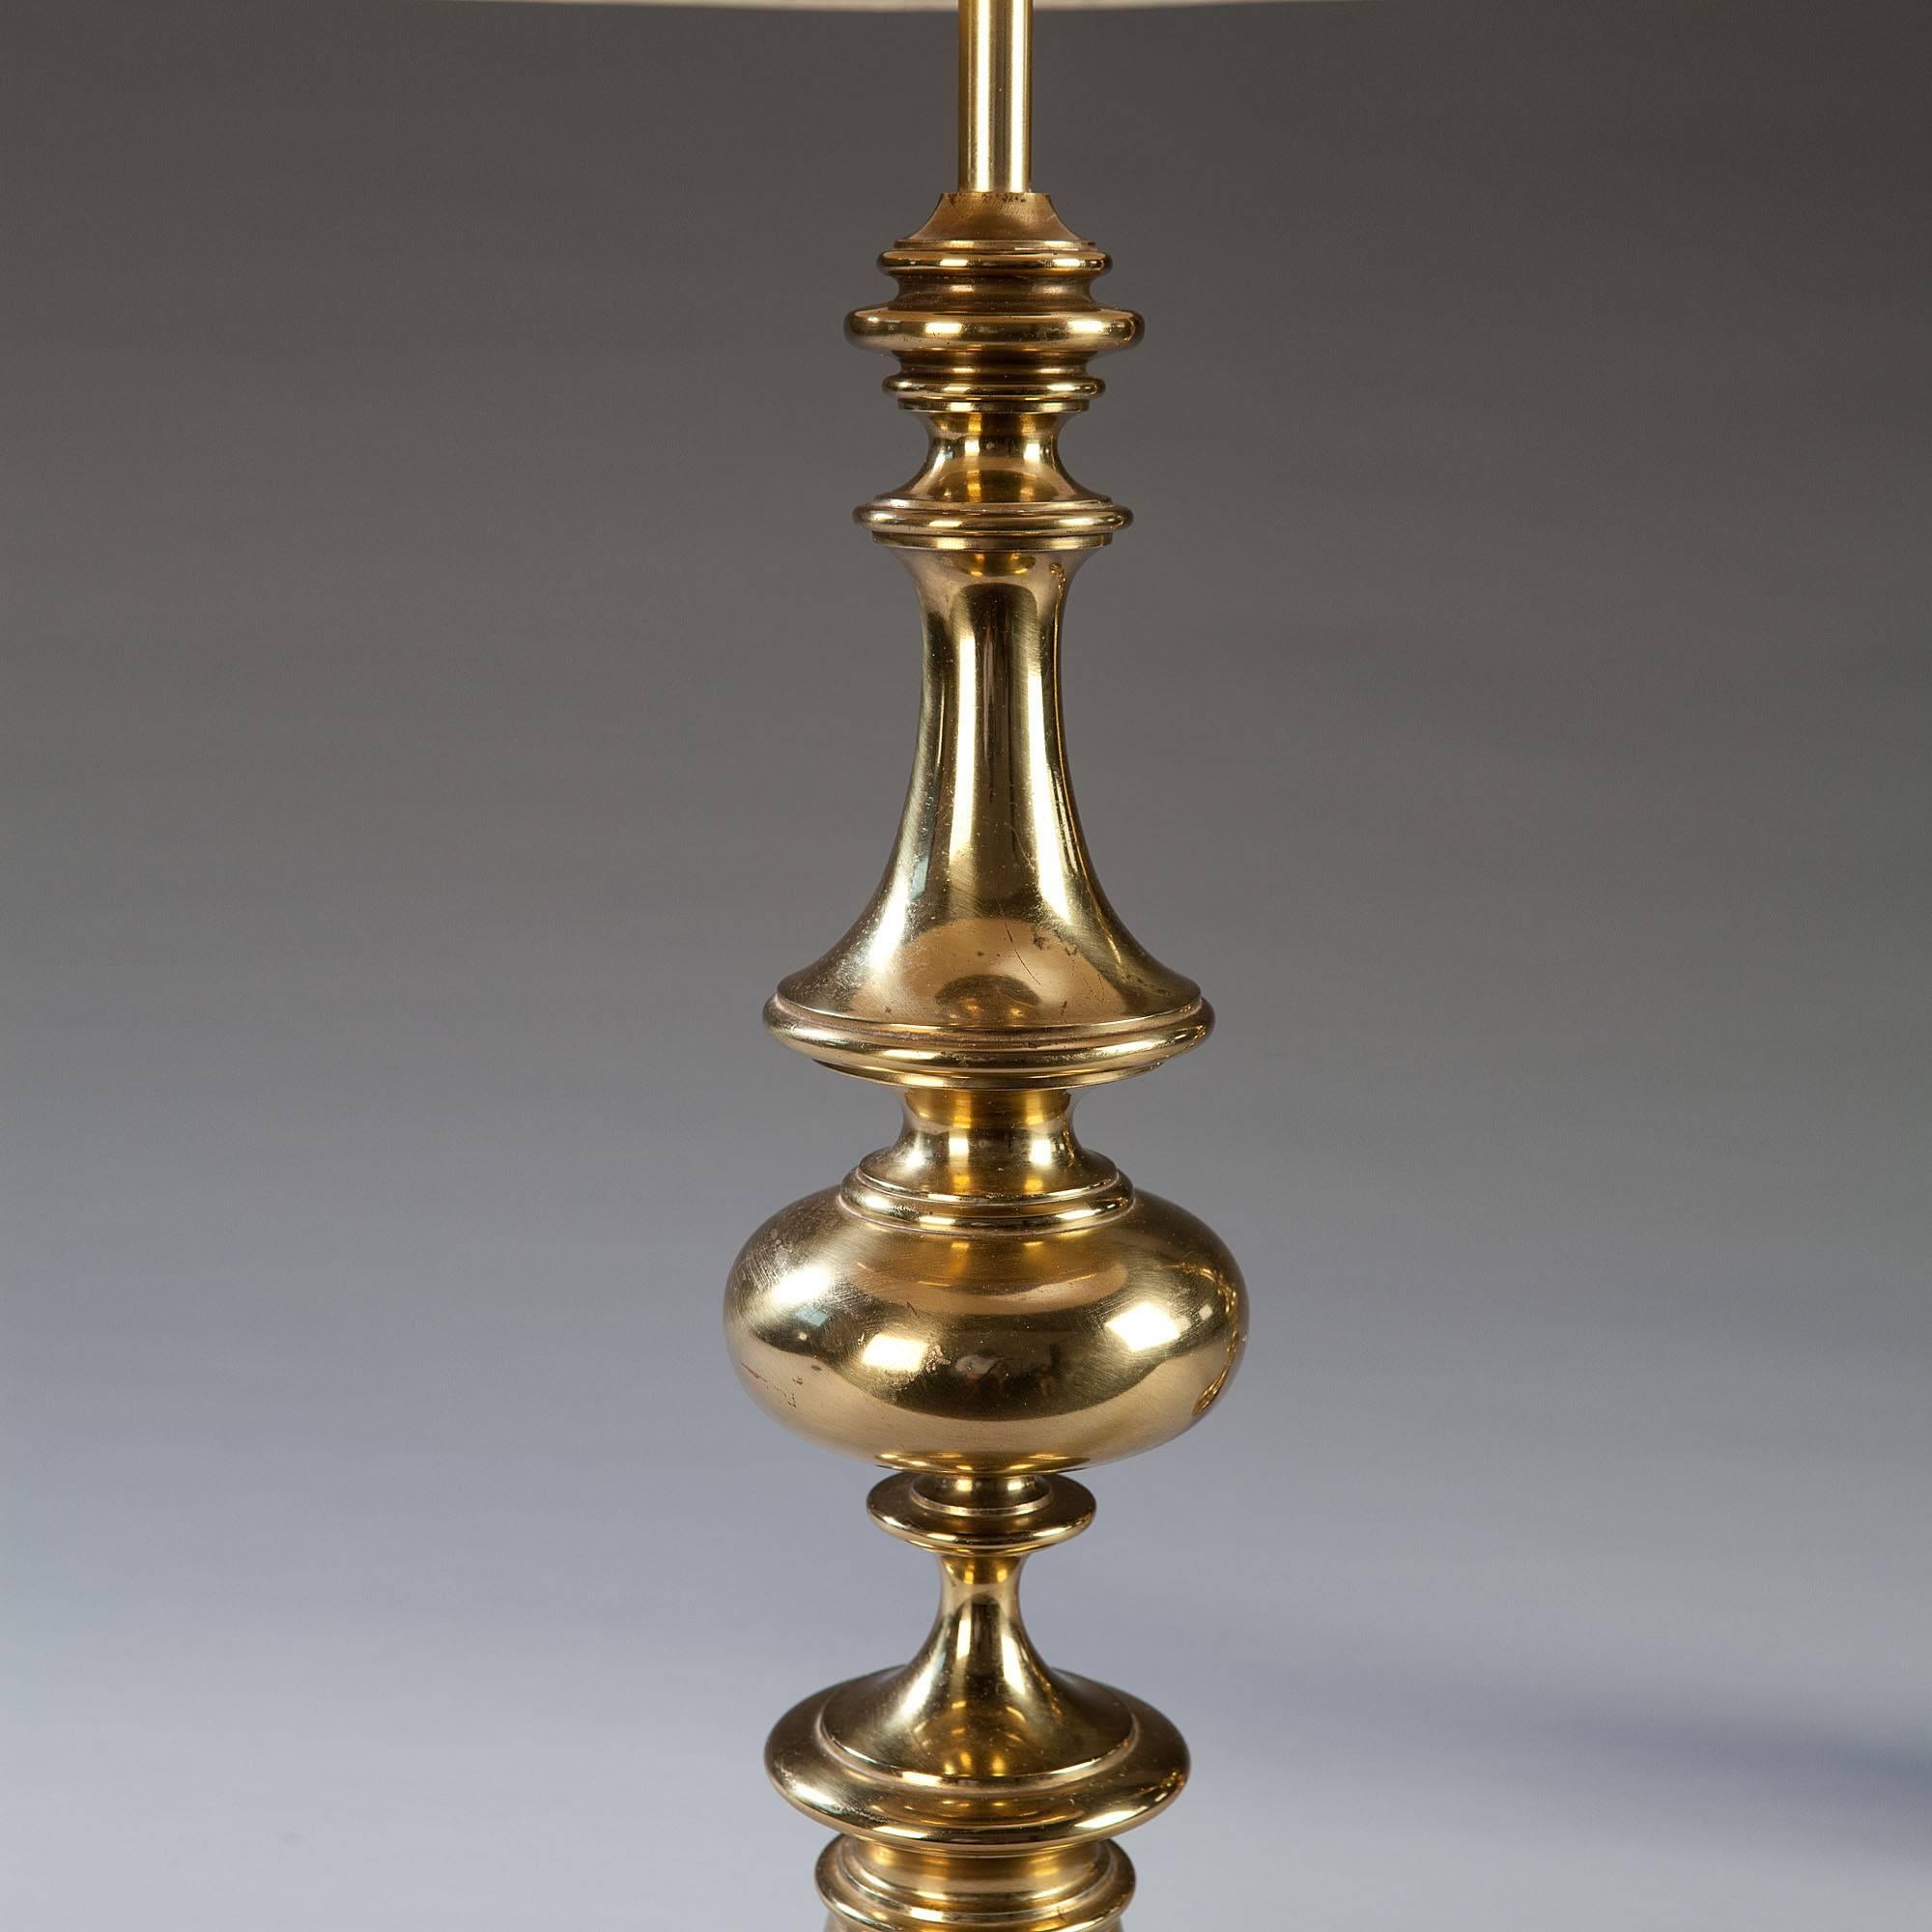 America, Mid-Century.

A fine pair of good scaled polished brass baluster lamps constructed of spheres and raised on a stepped base.

Height to light fitting 57cm (22.5in).
Height to top of column 48cm (19in).
Diameter of base 16cm